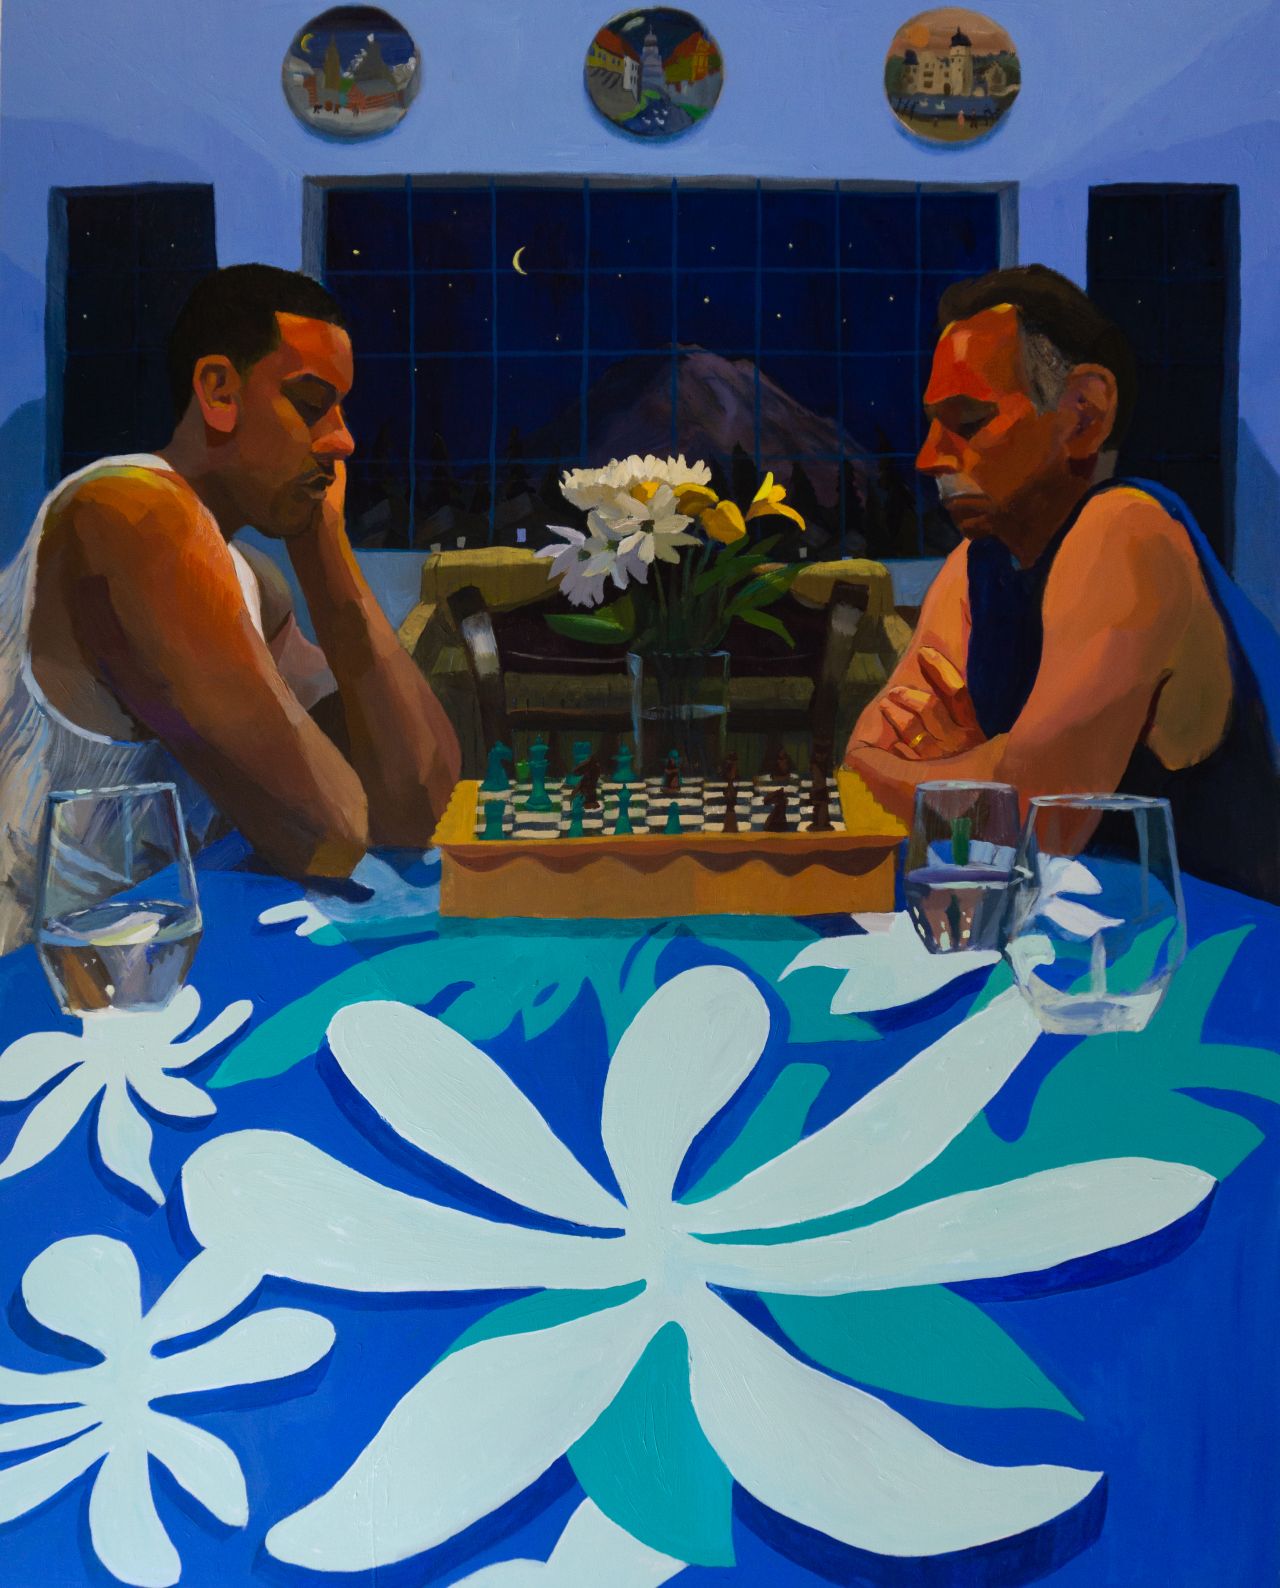 Mikey Yates, Chess with Dad (Mt. Rainier), 2021, courtesy of the artist and Taymour Grahne Projects